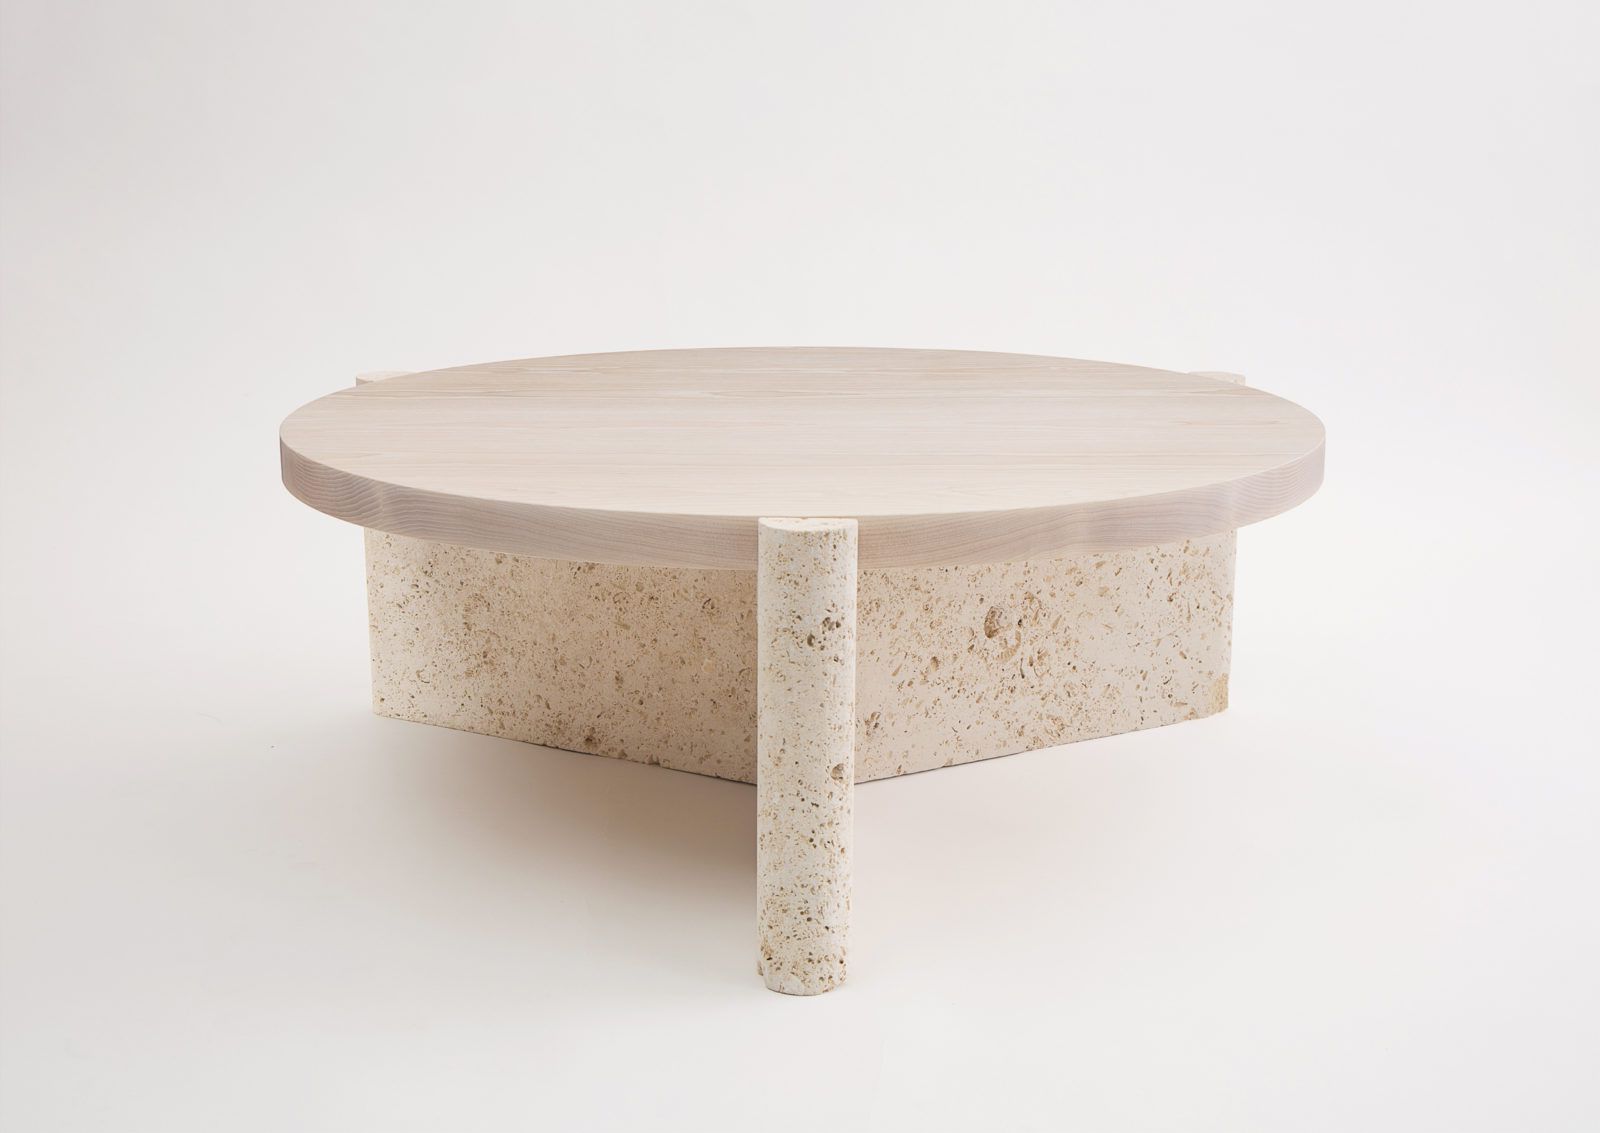 [%[27+] Monaco Round Concrete Coffee Table Within Most Up To Date Monaco Round Coffee Tables|monaco Round Coffee Tables Intended For Current [27+] Monaco Round Concrete Coffee Table|well Known Monaco Round Coffee Tables With [27+] Monaco Round Concrete Coffee Table|well Known [27+] Monaco Round Concrete Coffee Table Pertaining To Monaco Round Coffee Tables%] (Photo 5 of 15)